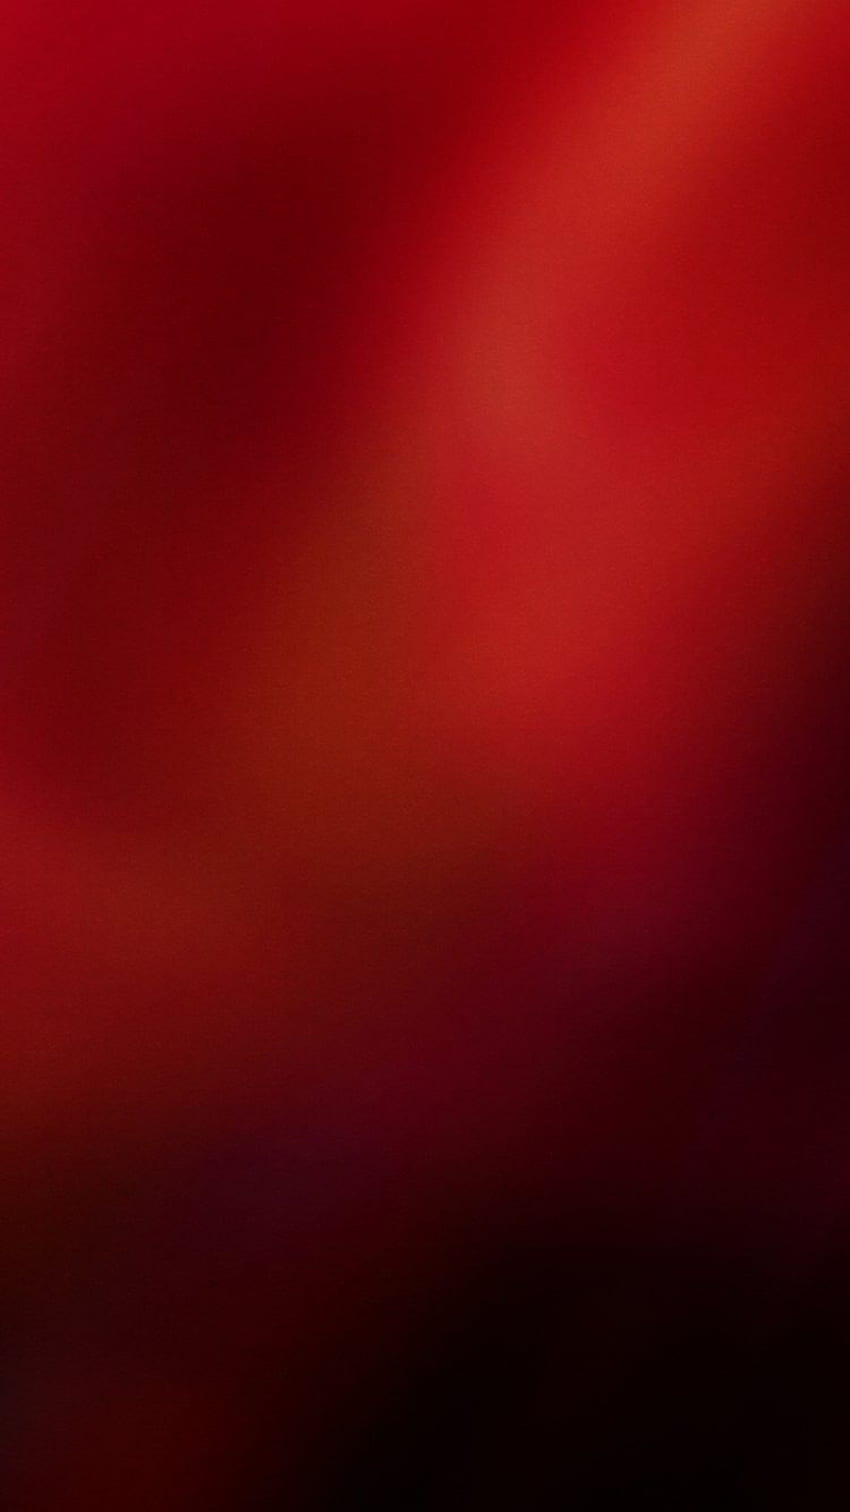 Where to buy Red iPhone 6 27717 - Abstract iPhone 6 HD phone wallpaper